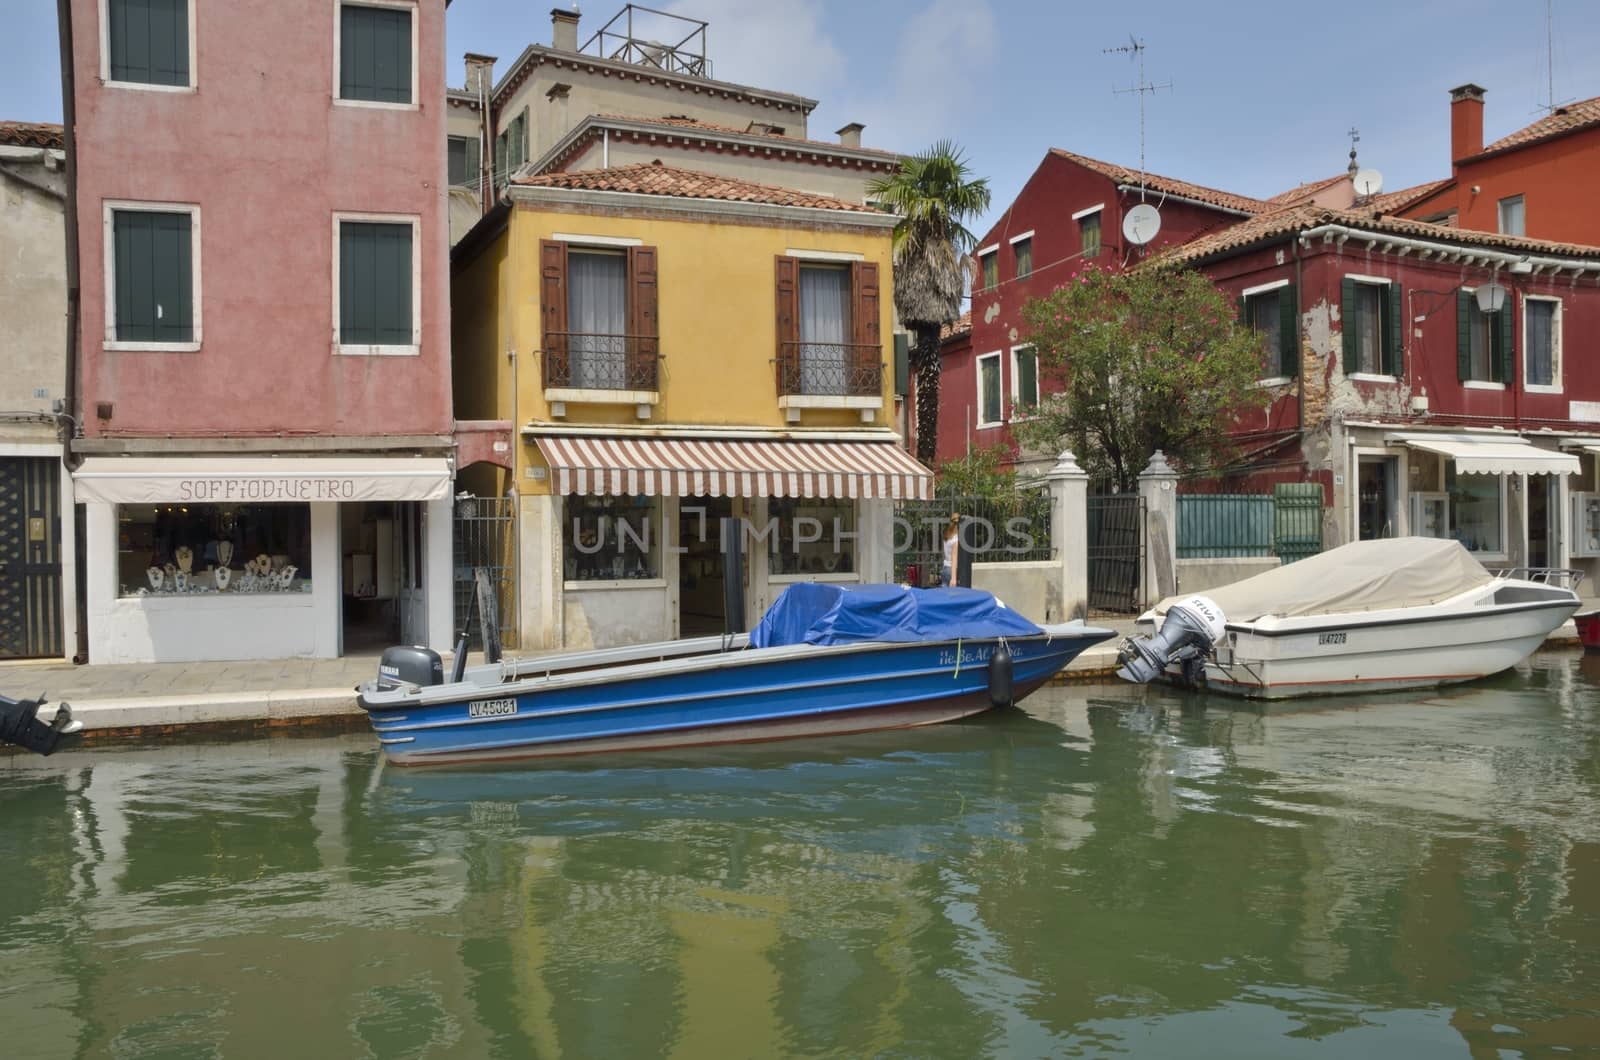 Boats parken on a small canal in Murano, an island in the Venetian Lagoon, northern Italy.